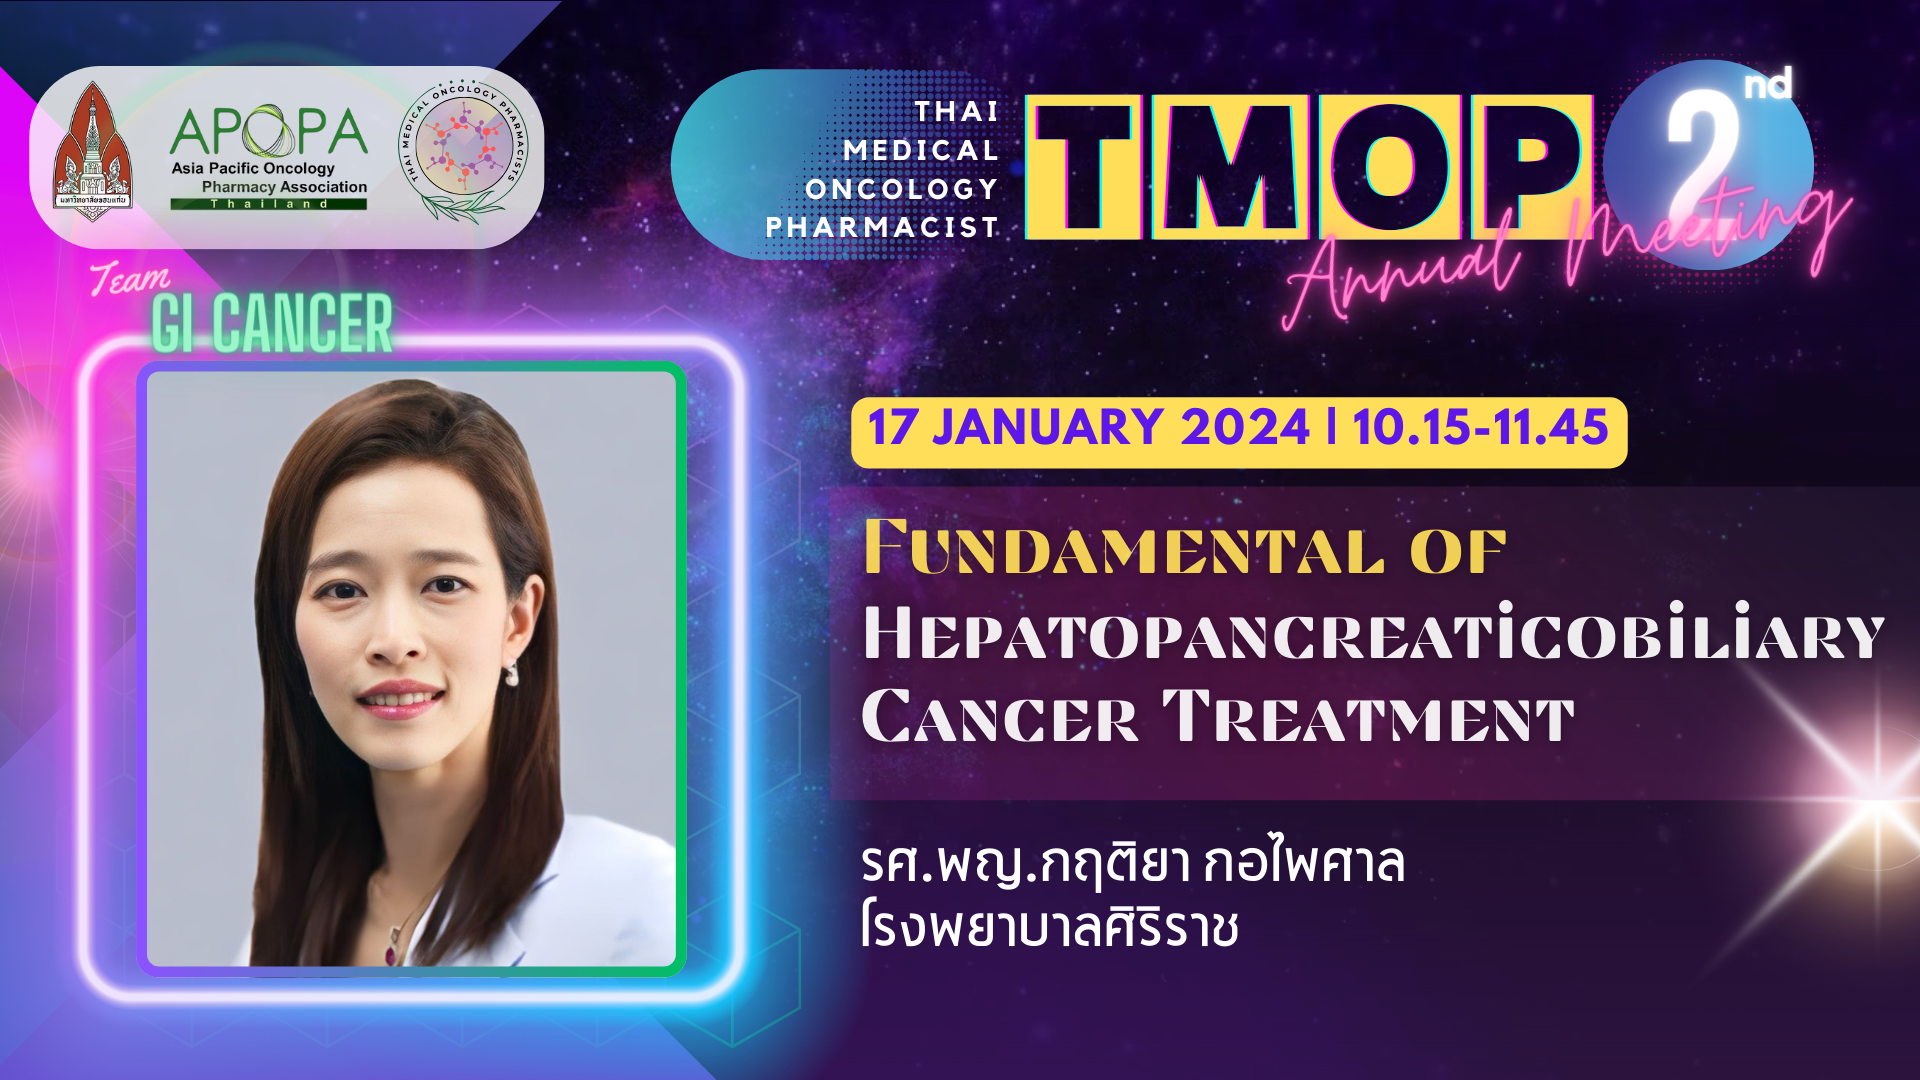 TMOP annual meeting 2024 TOPIC: Fundamental of Hepatobiliary Cancer Treatment